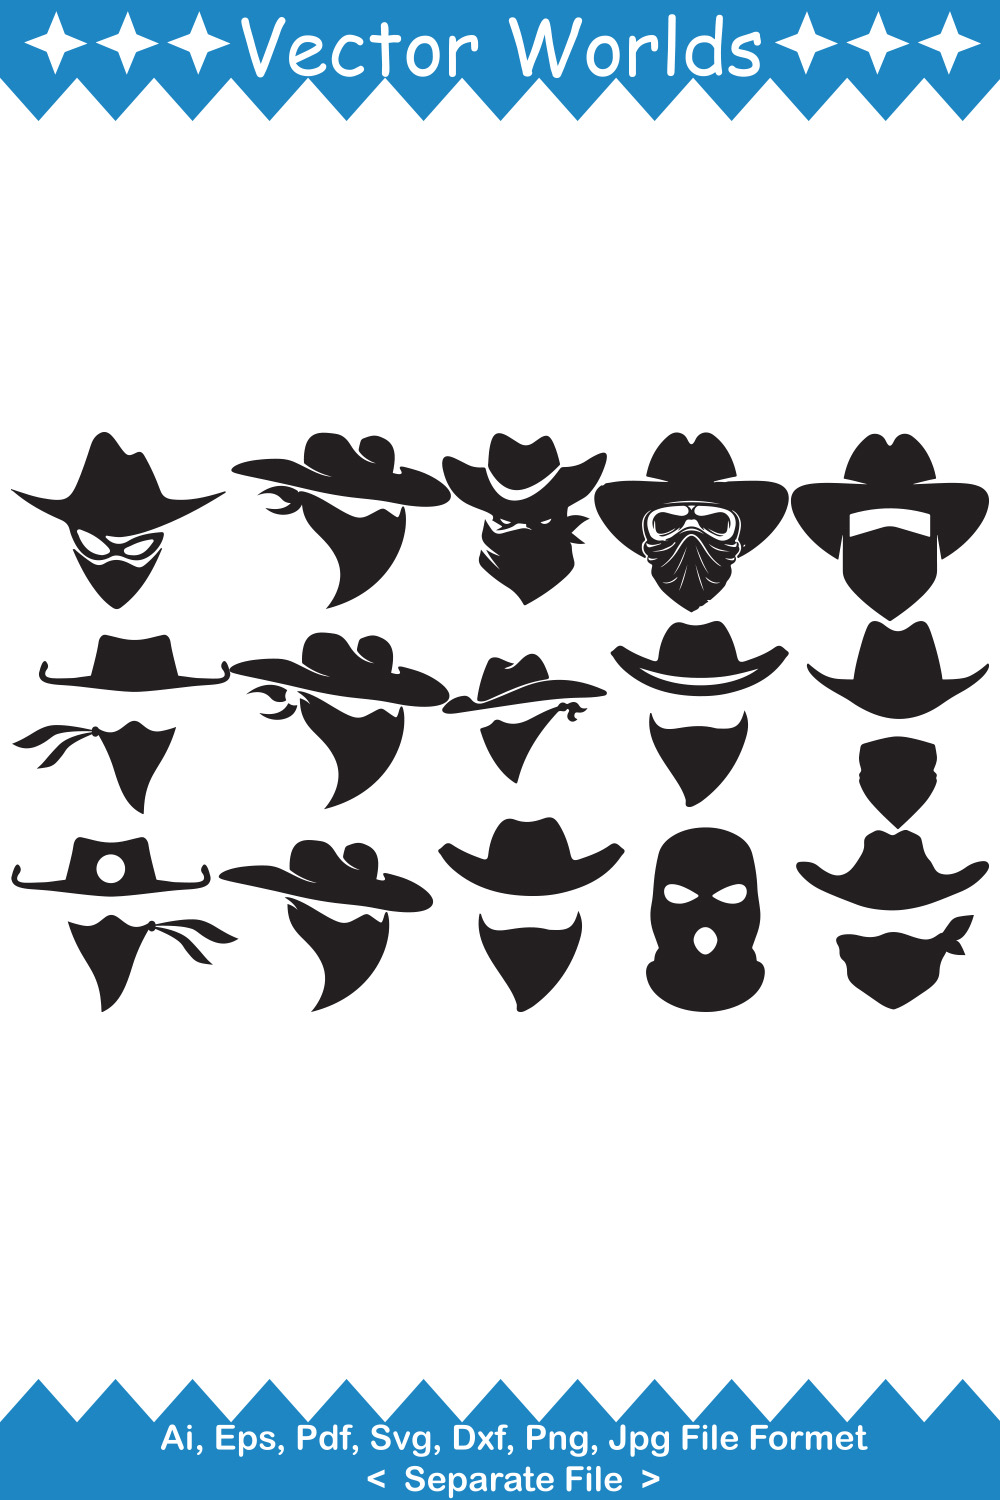 A selection of charming vector images of the faces of bandits in cowboy hats and masks.